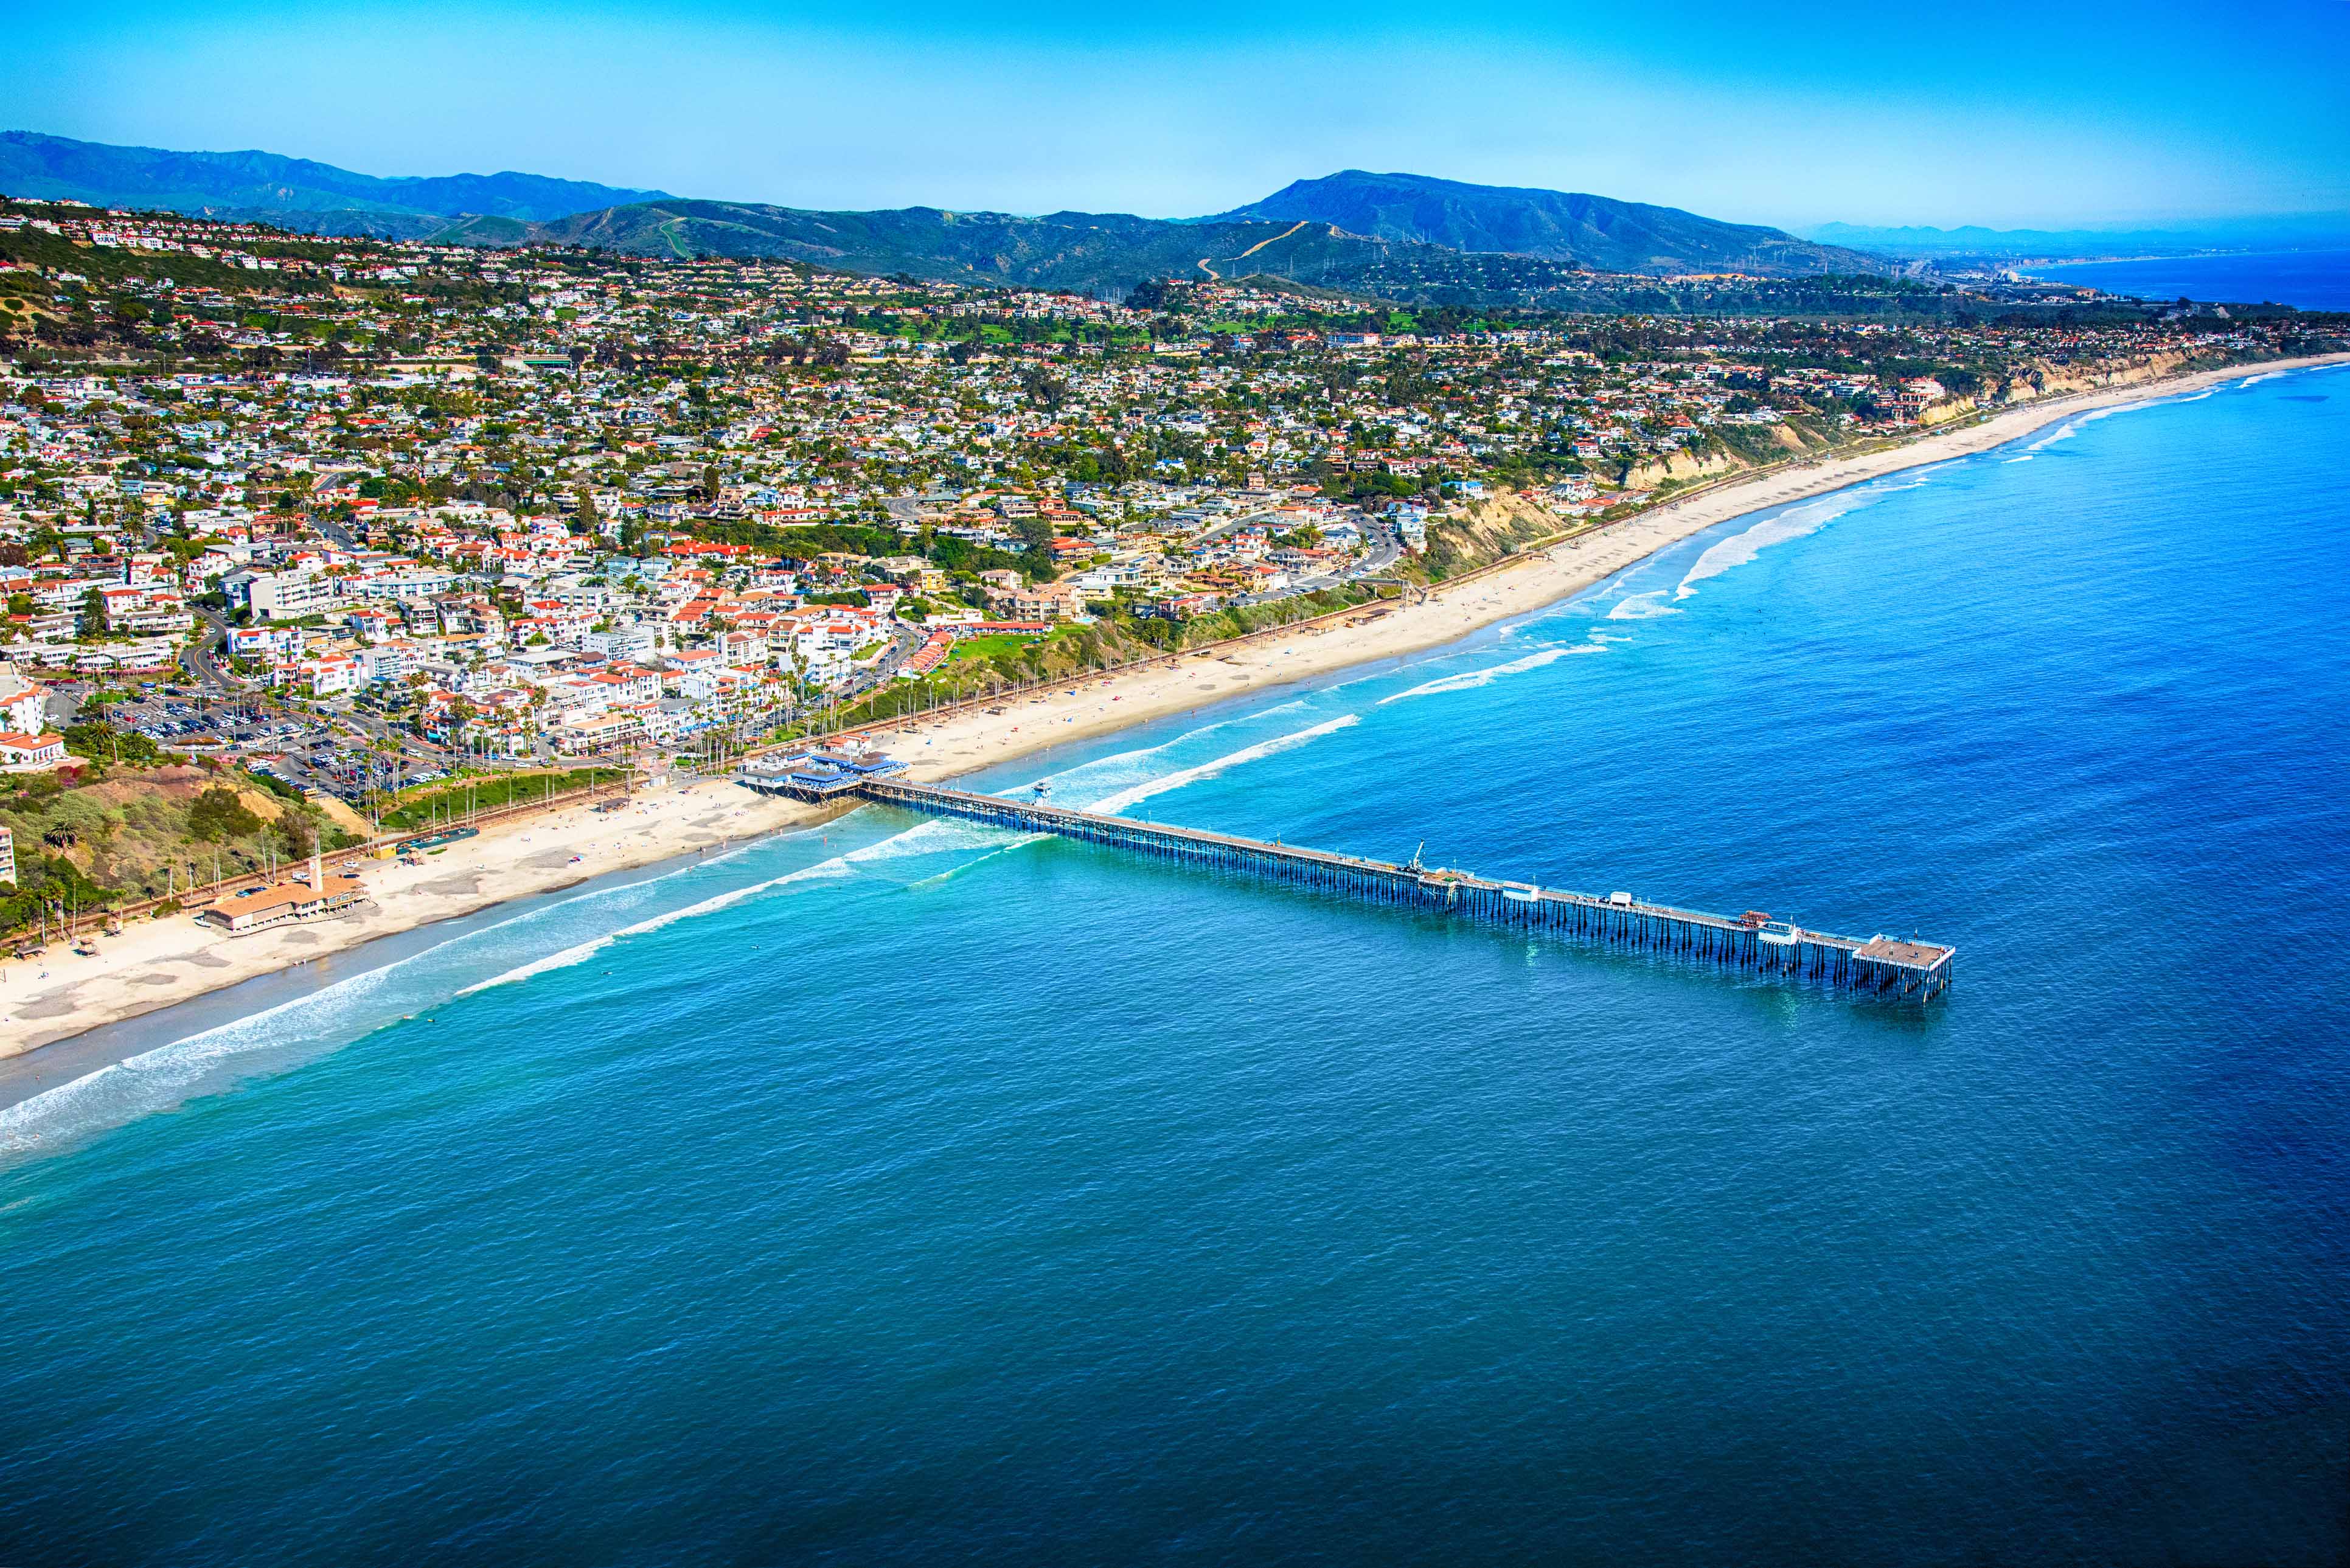 is san clemente worth visiting